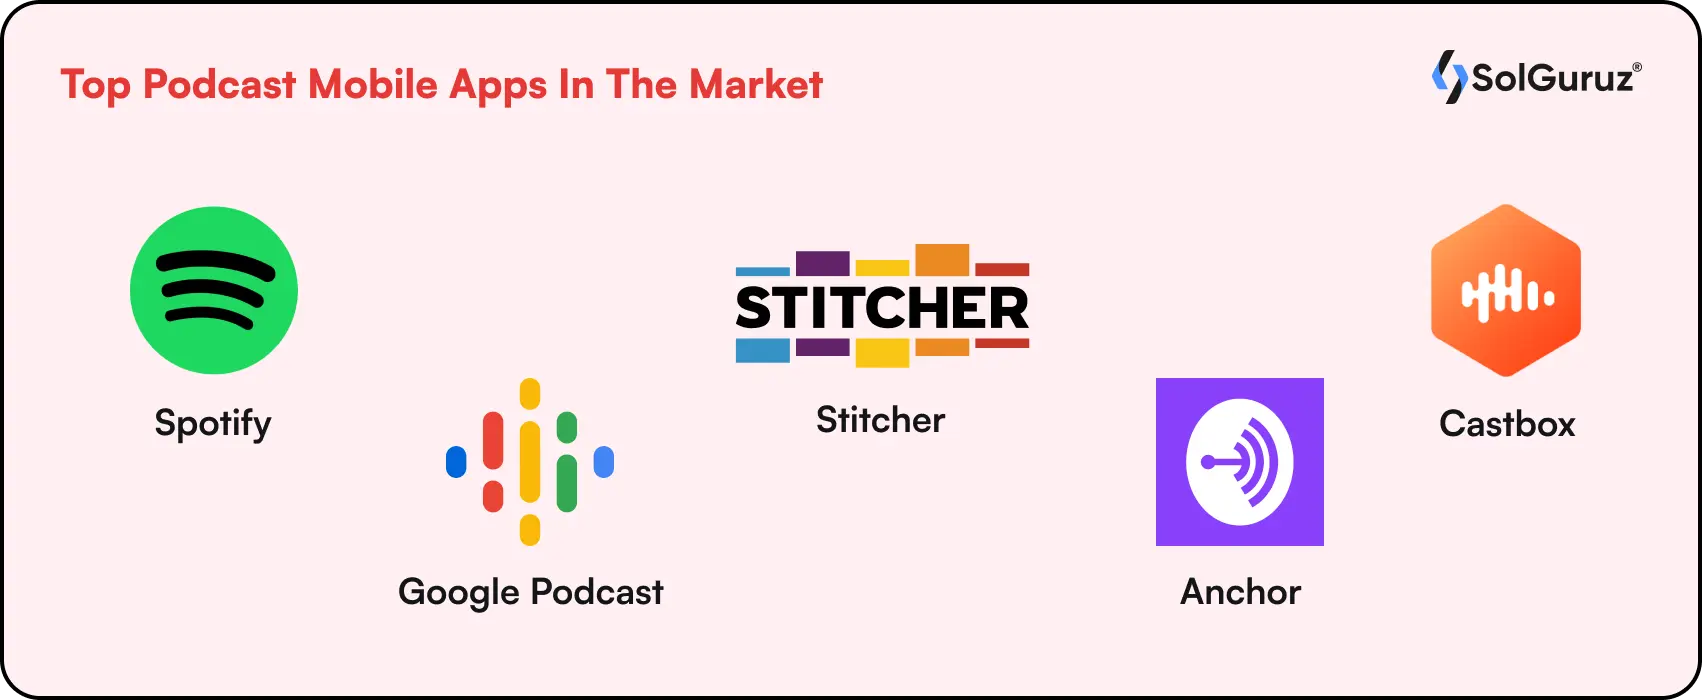 Top Podcast Mobile Apps In The Market